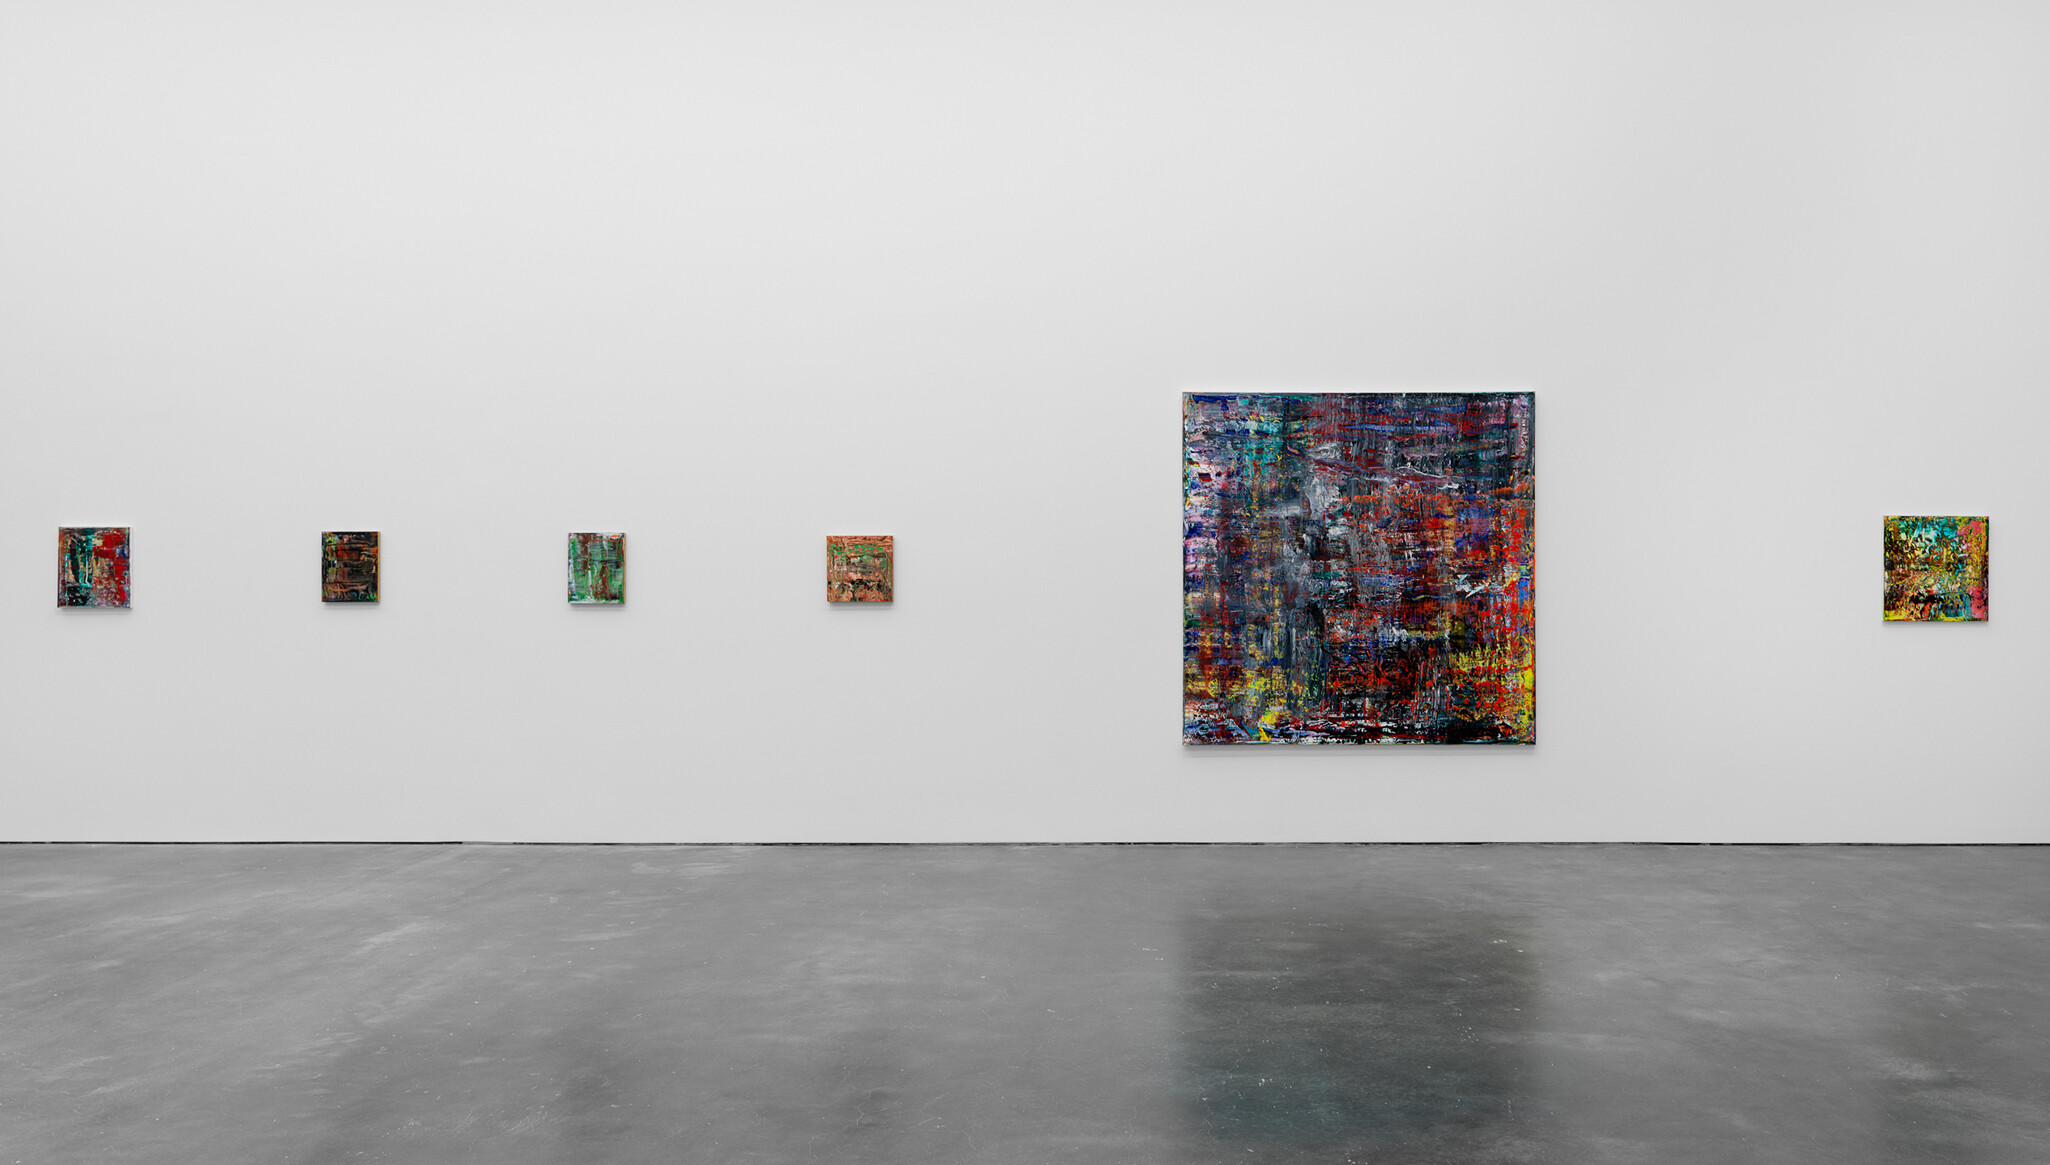 Gerhard Richter on his landscape 'photo-paintings': 'I am seeking something  quite specific